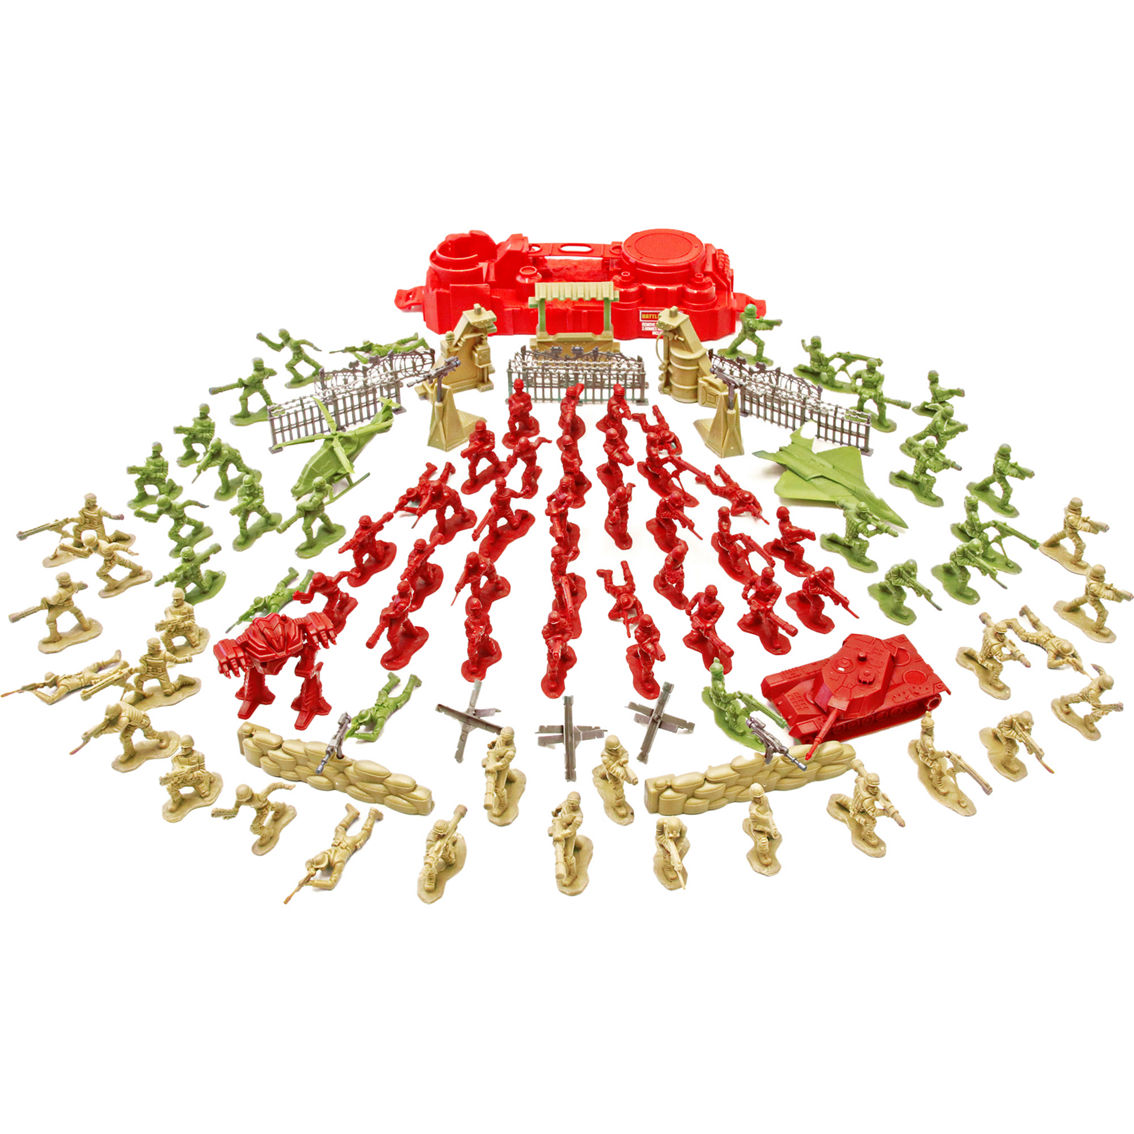 Lanard The Corps Universe Army 104 pc. Set with Troop Army and Battle Base - Image 2 of 5